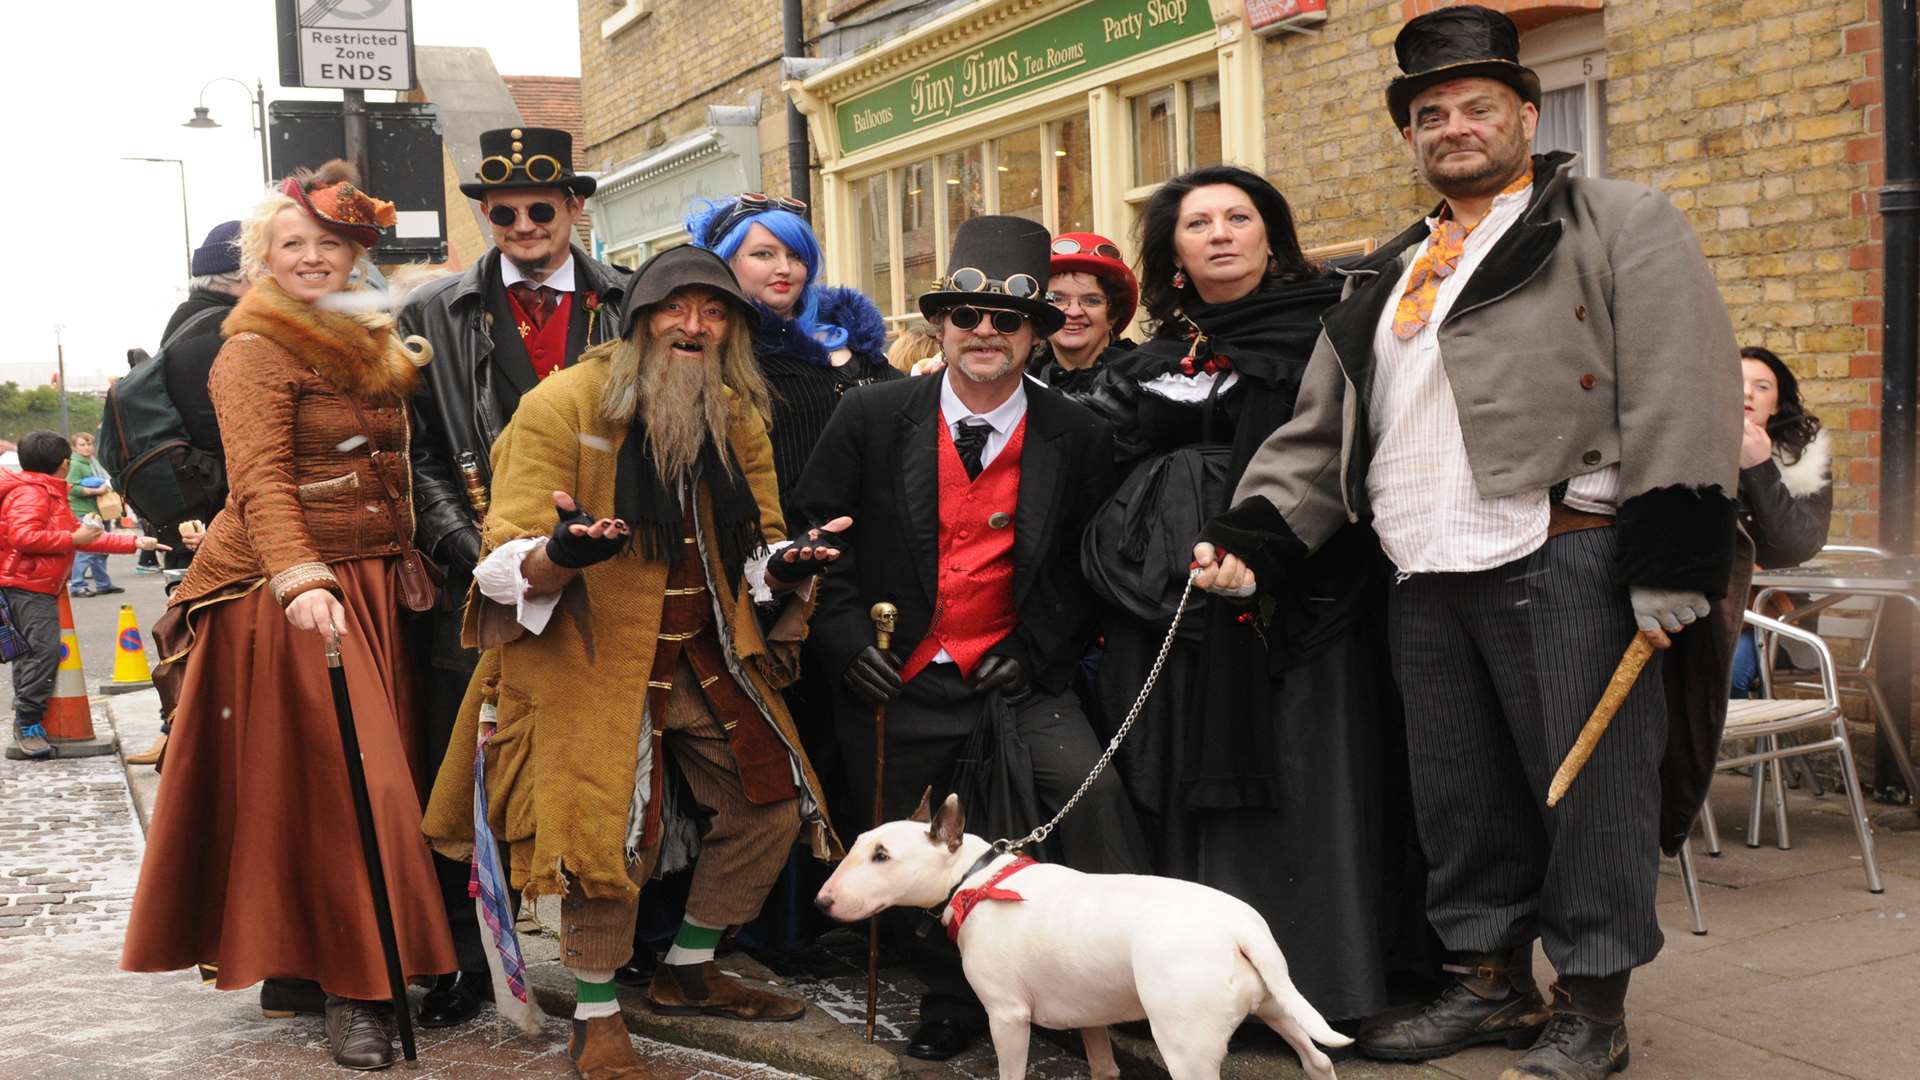 Fagin, Bill Sykes and Bull's Eye with other Dickensian characters.